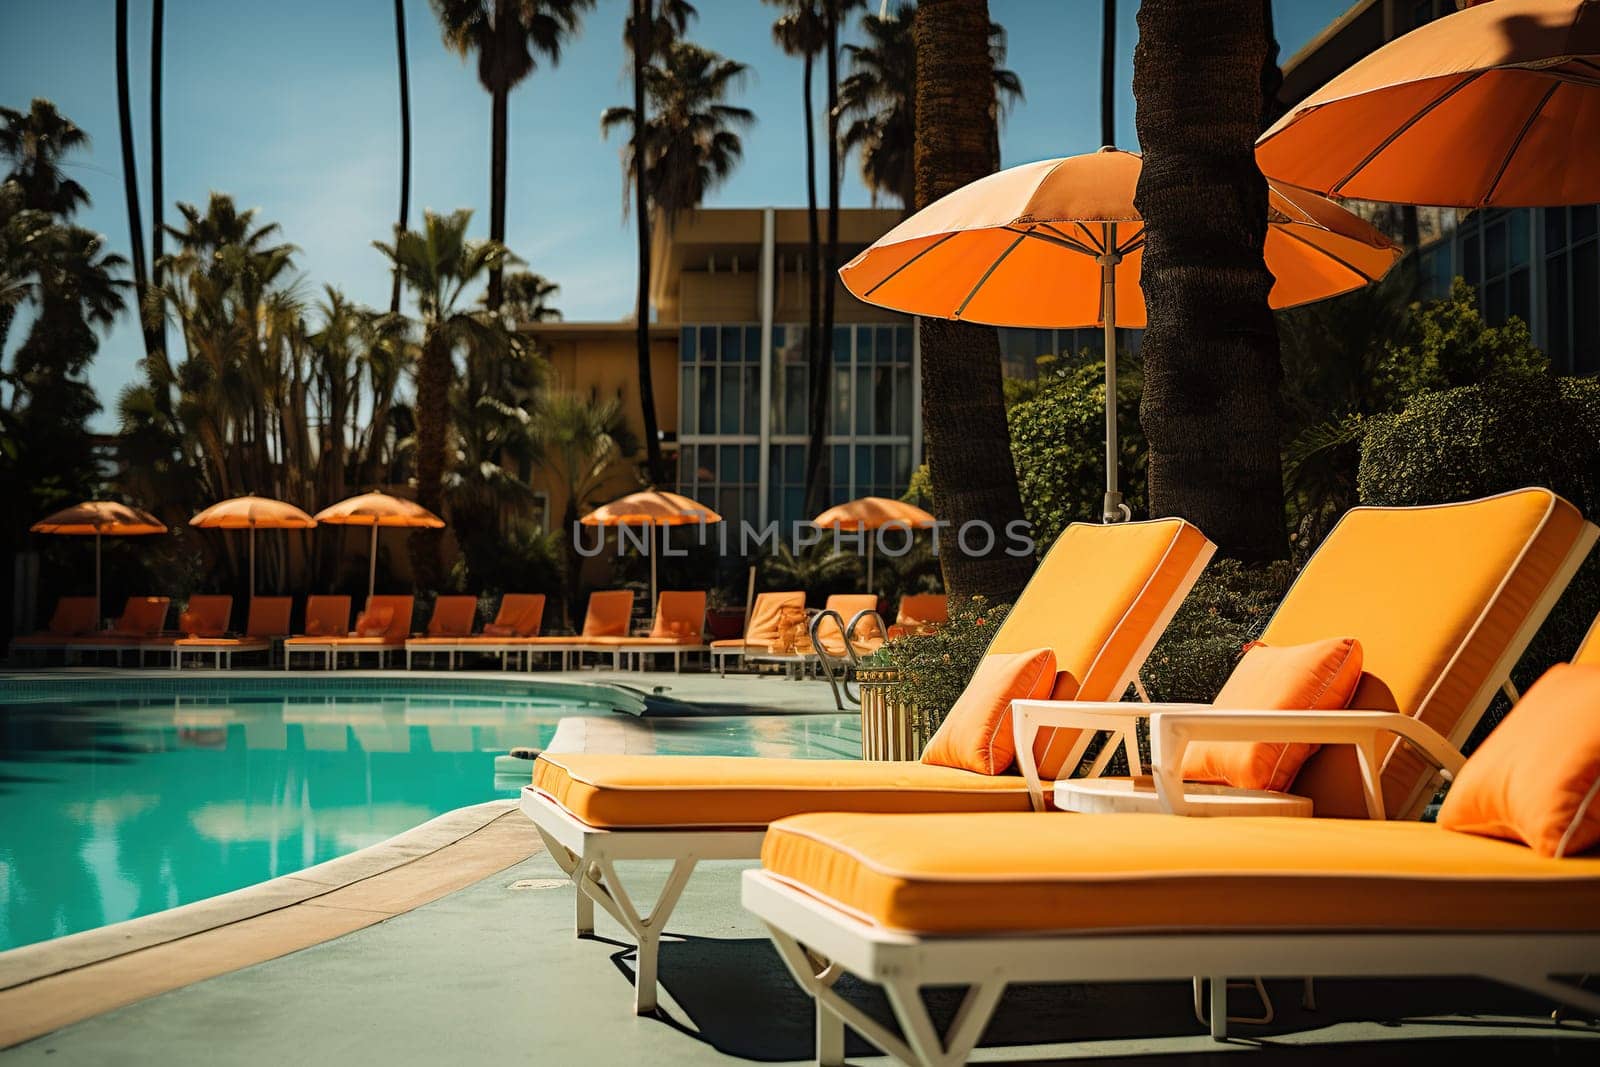 Orange sun loungers by the pool on site. Sunny summer travel vacation.